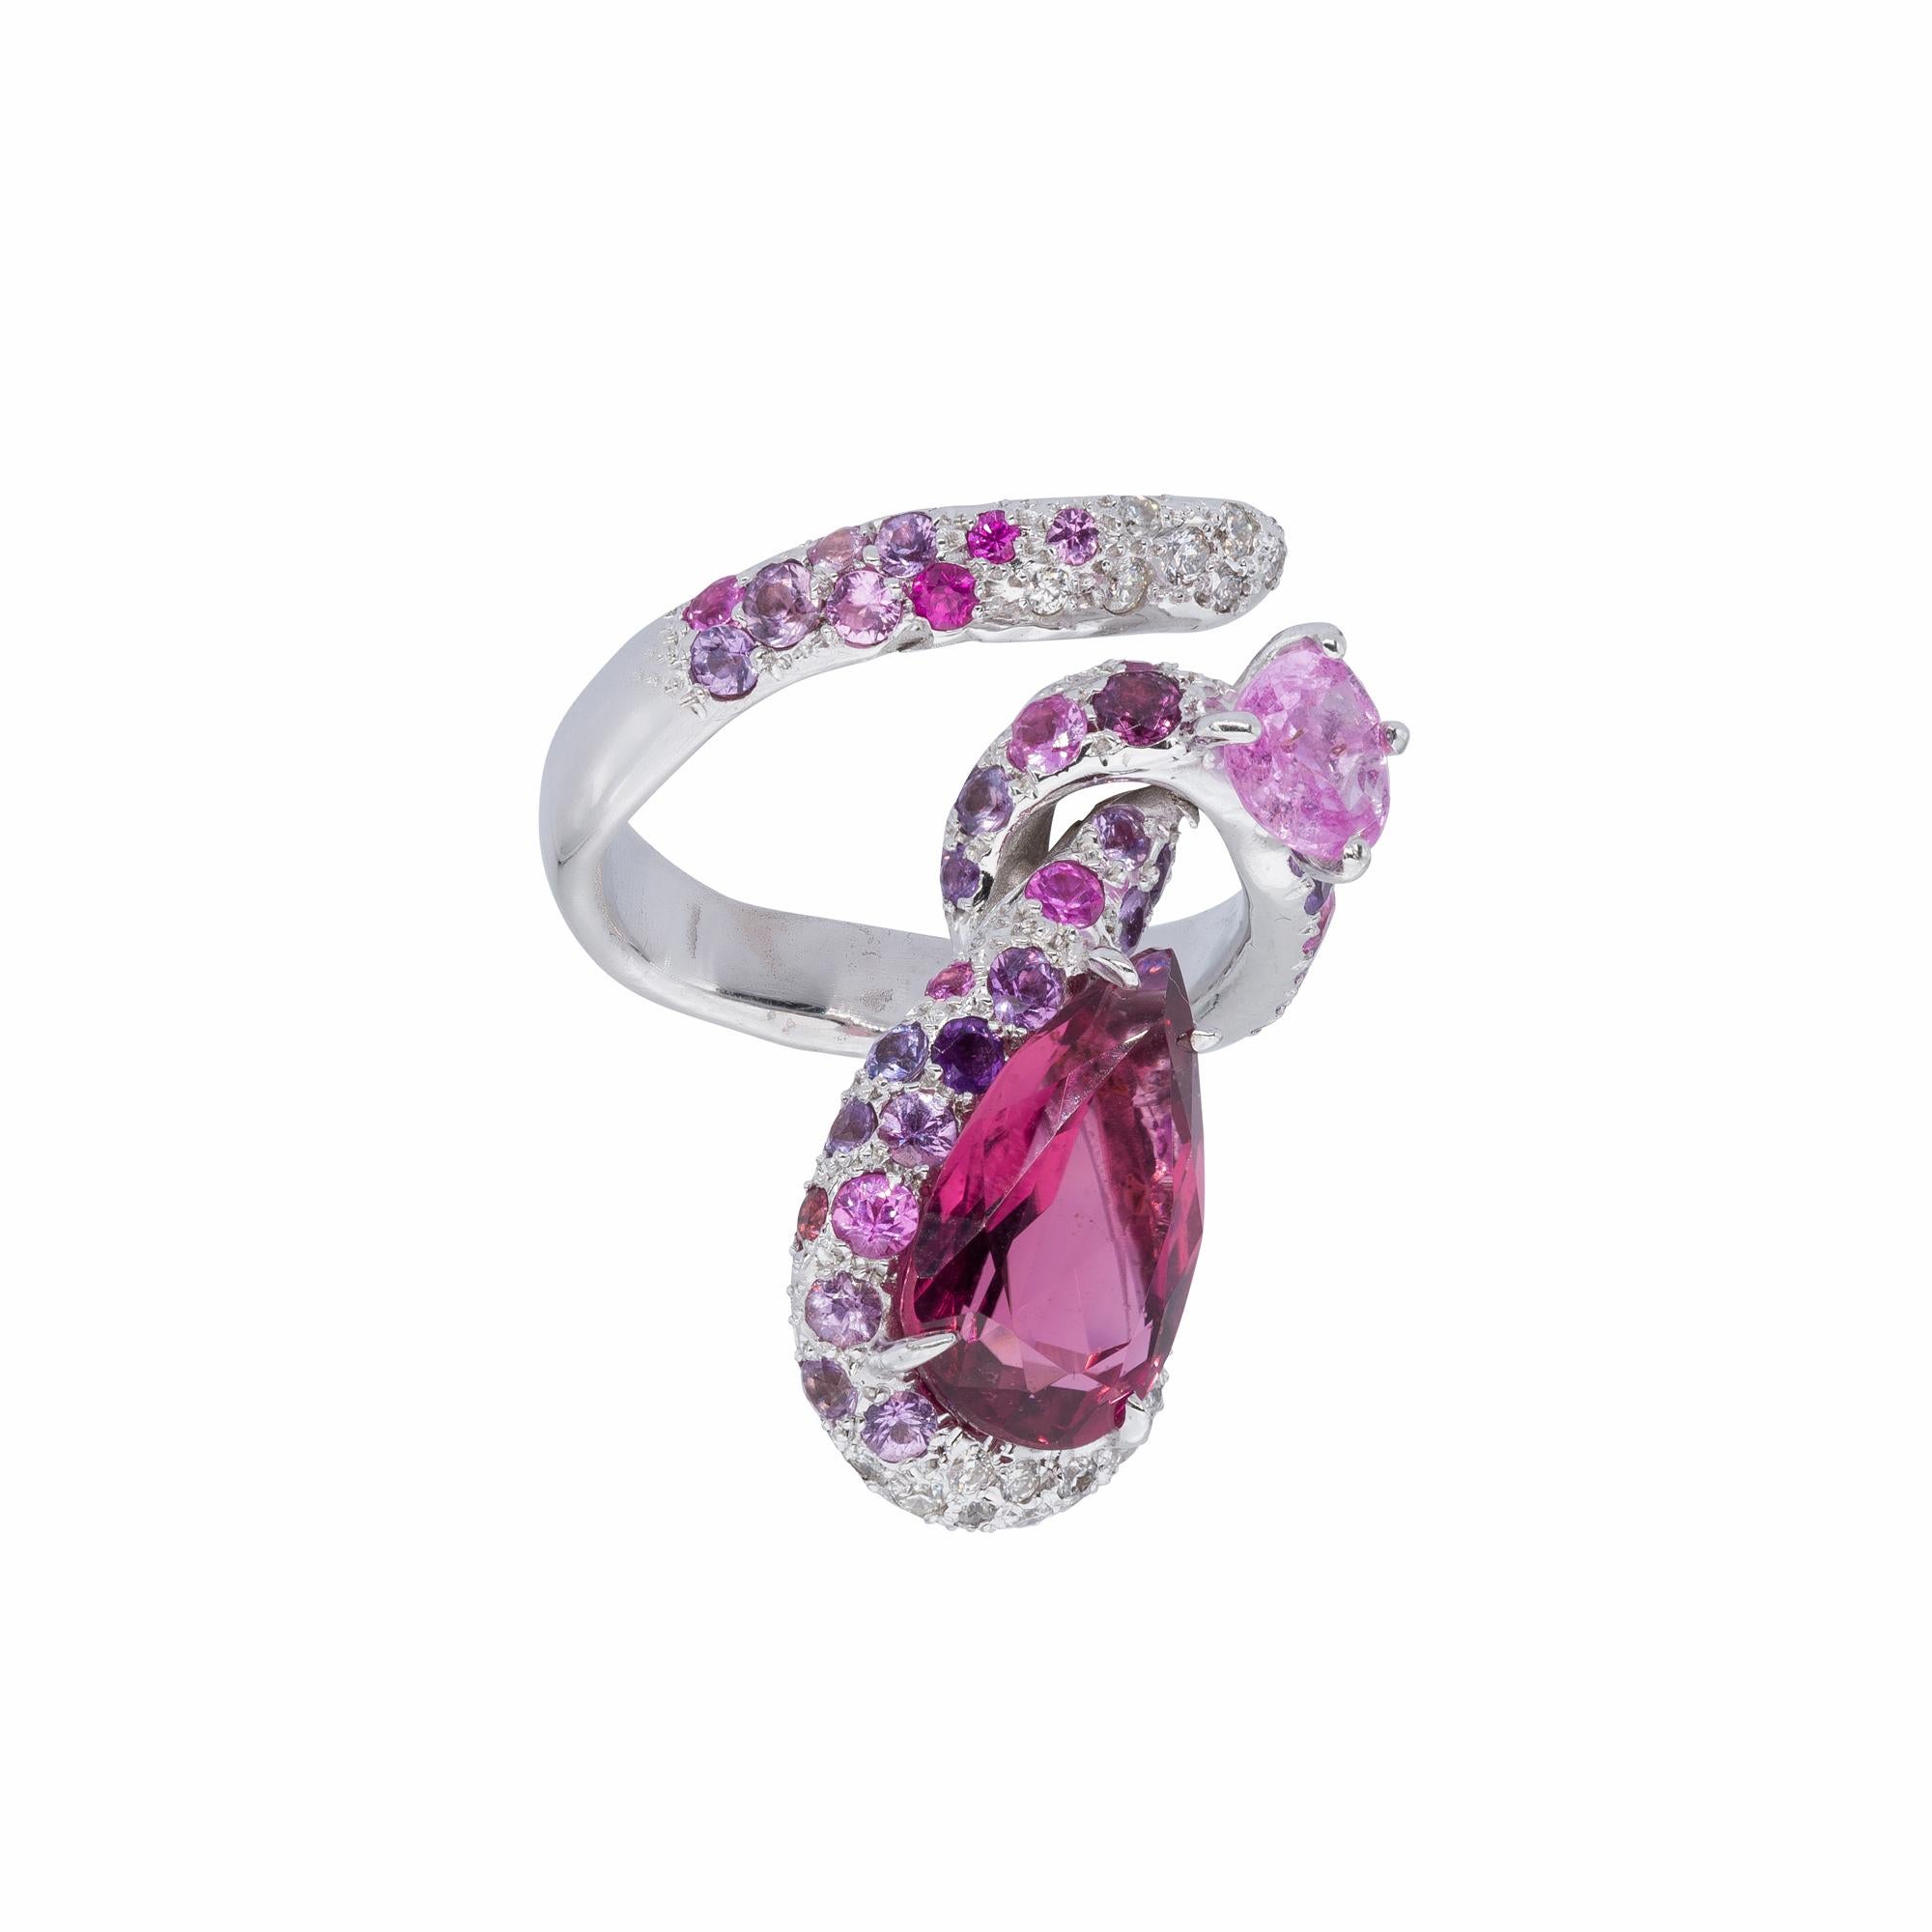 Women's d'Avossa Ring in White Gold with Pink Tourmaline, Pink Sapphires and Diamonds For Sale